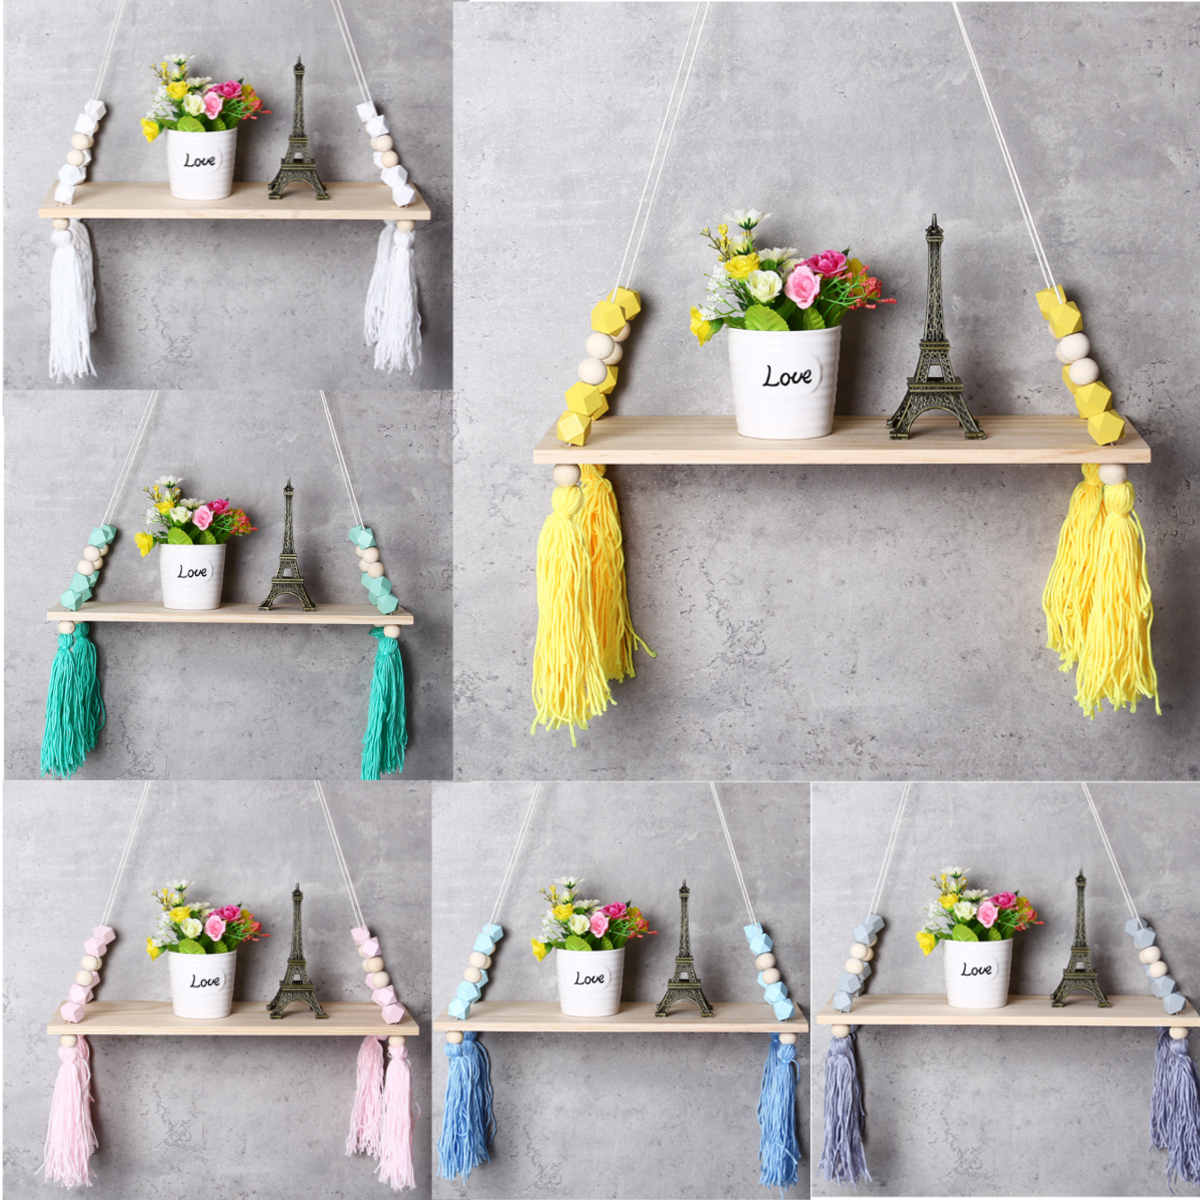 Floating Shelves by Fireplace New Details About Wall Hanging Swing Shelf Shelves Baby Kids Room Storage Holder Wood Rope Decor